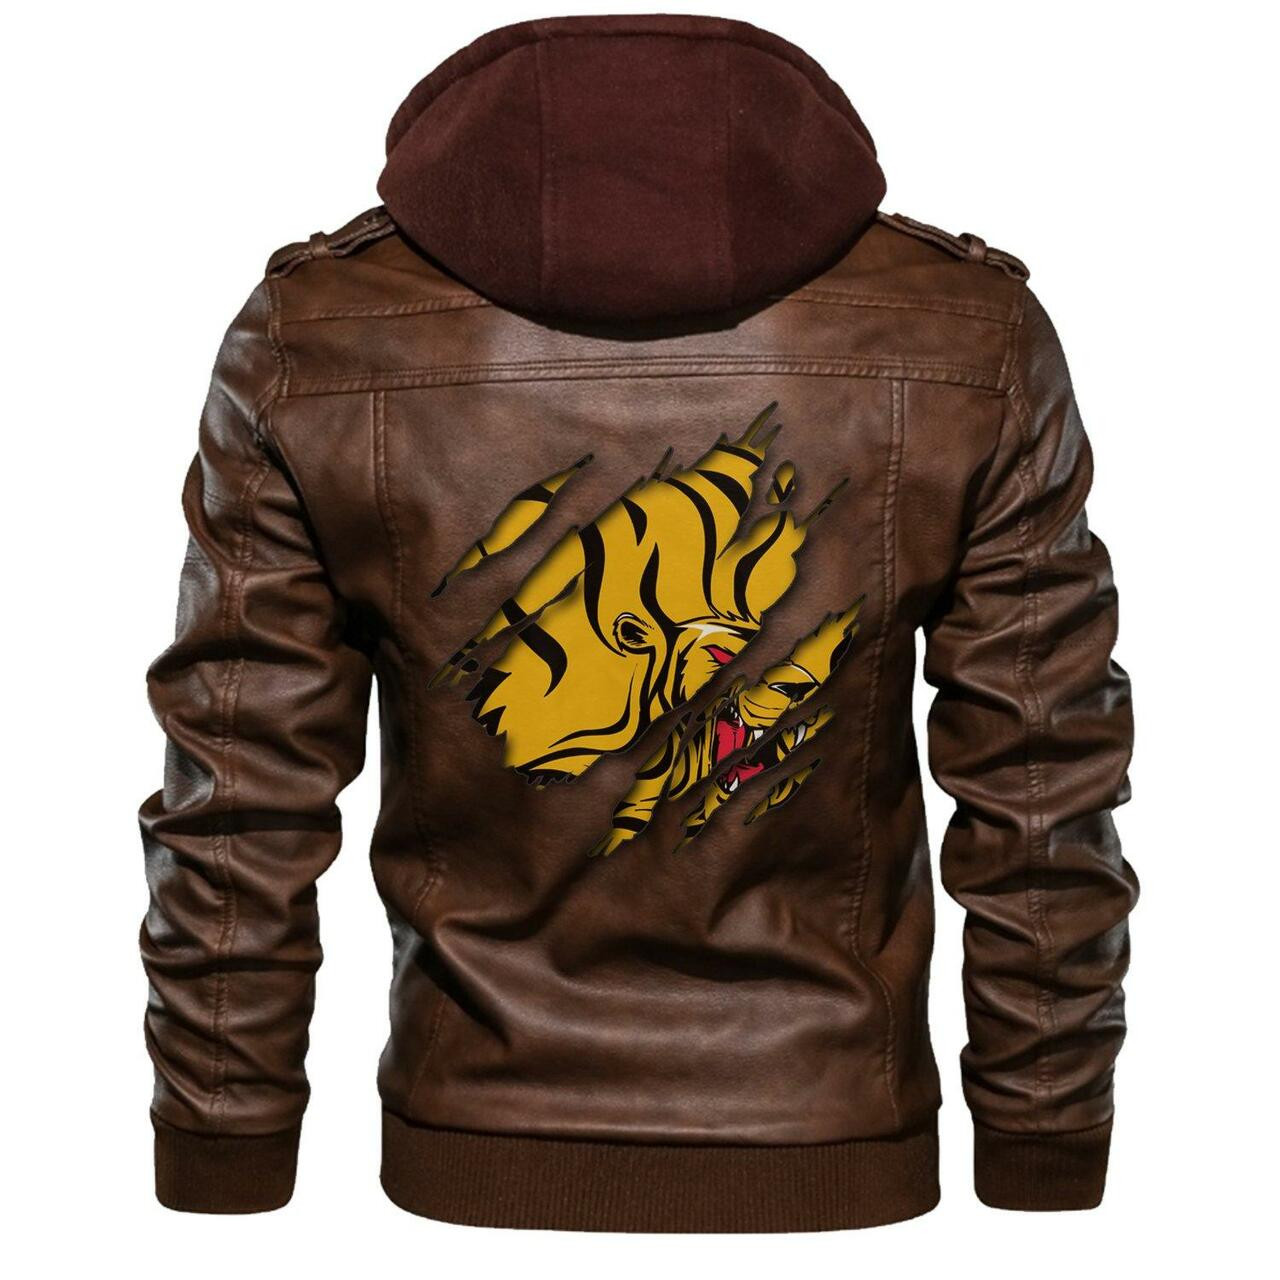 Check out our collection of the latest and greatest leather jacket 221